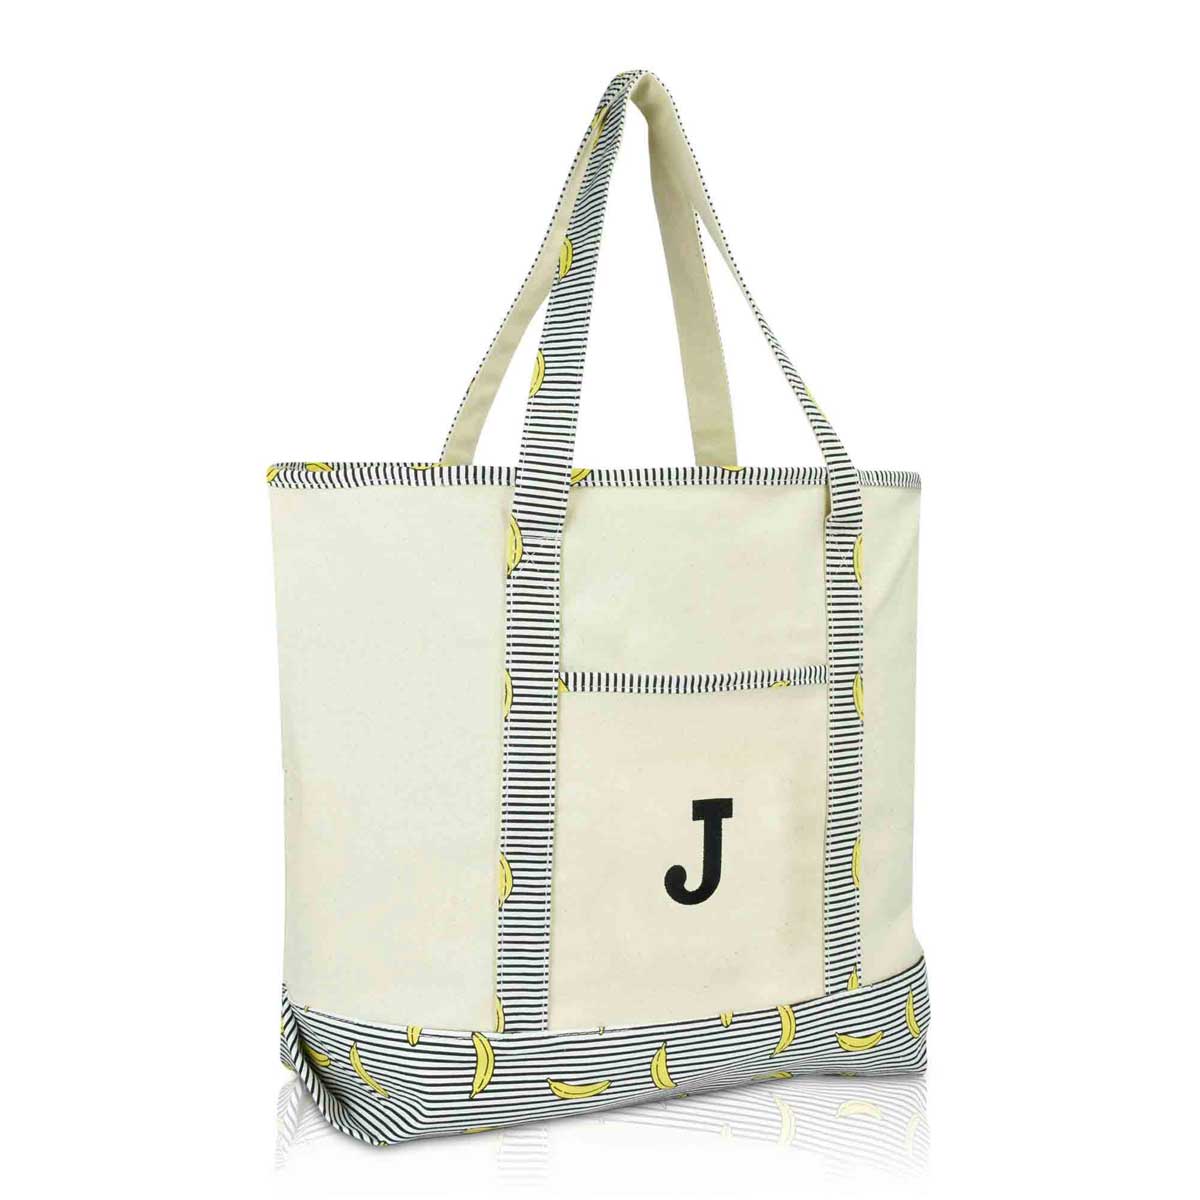 Dalix Initial Tote Bag Personalized Monogram Zippered Top Letter - D Black